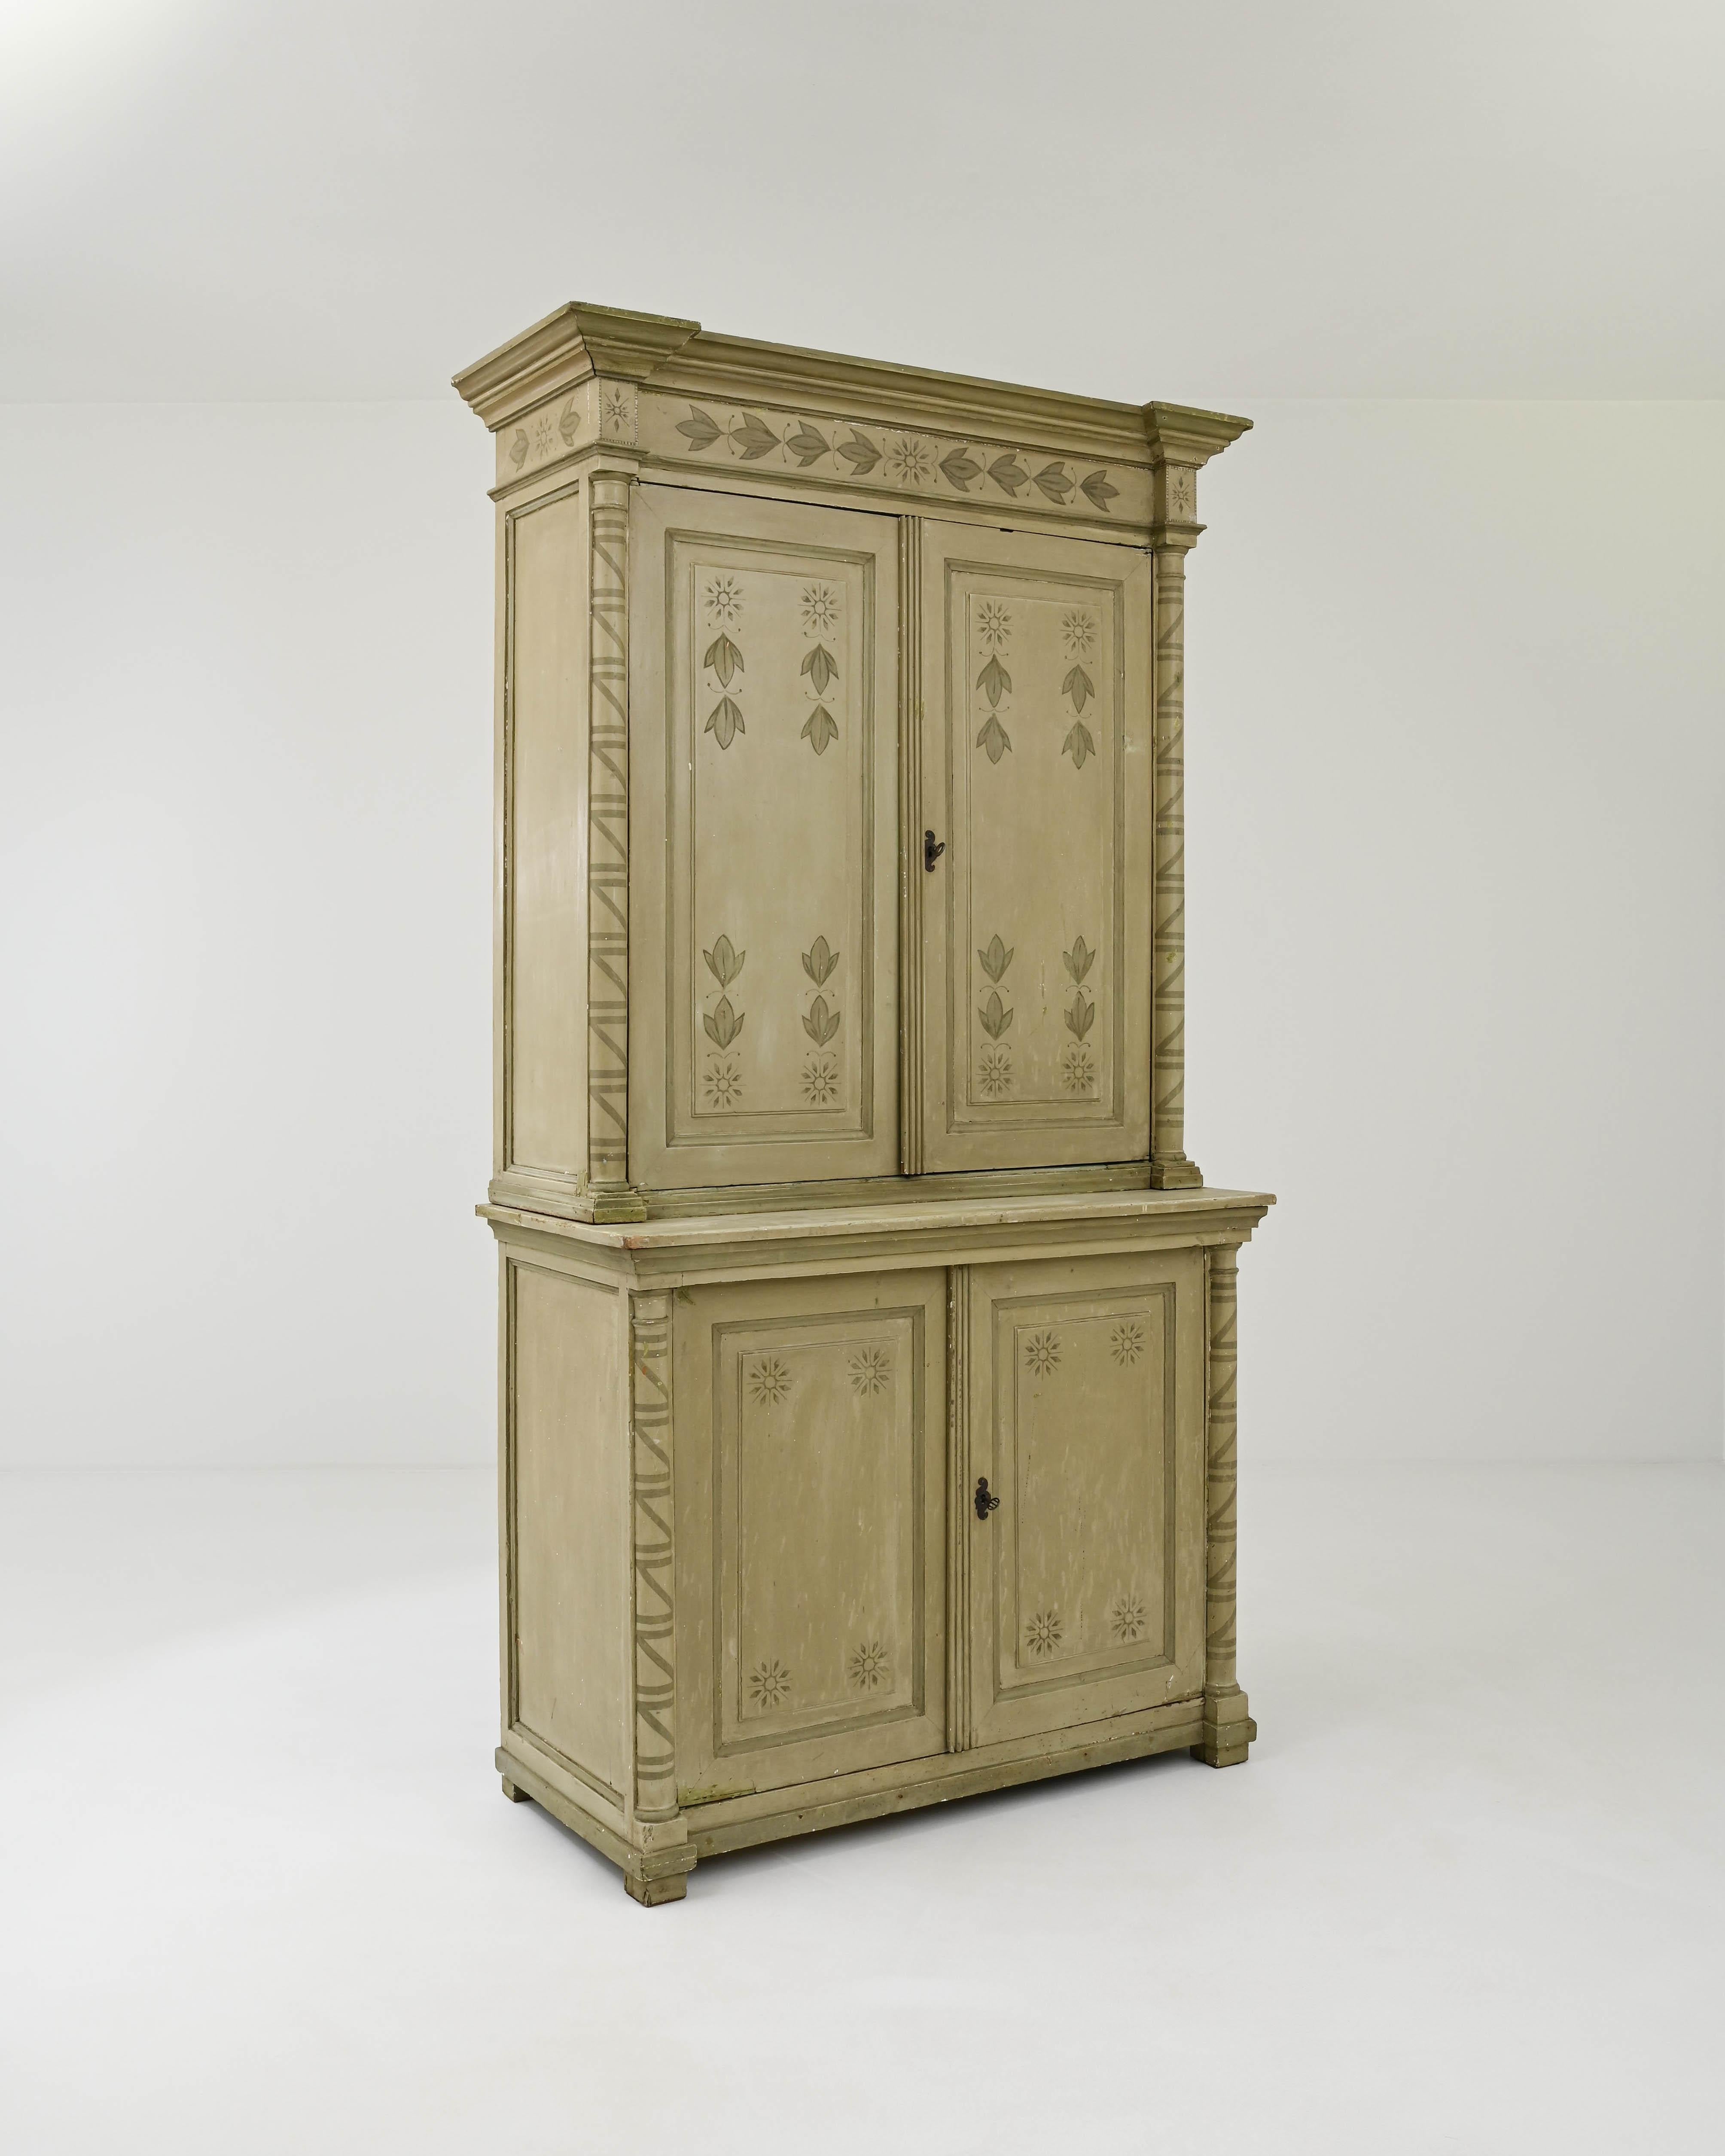 Flaunting a gorgeous olive hued patina, this wooded à deux corps giant was hand-crafted in Scandinavia during the 19th century. Masterfully carved elements, including the molded cornice, panels, columns, and the base, are complemented by charming